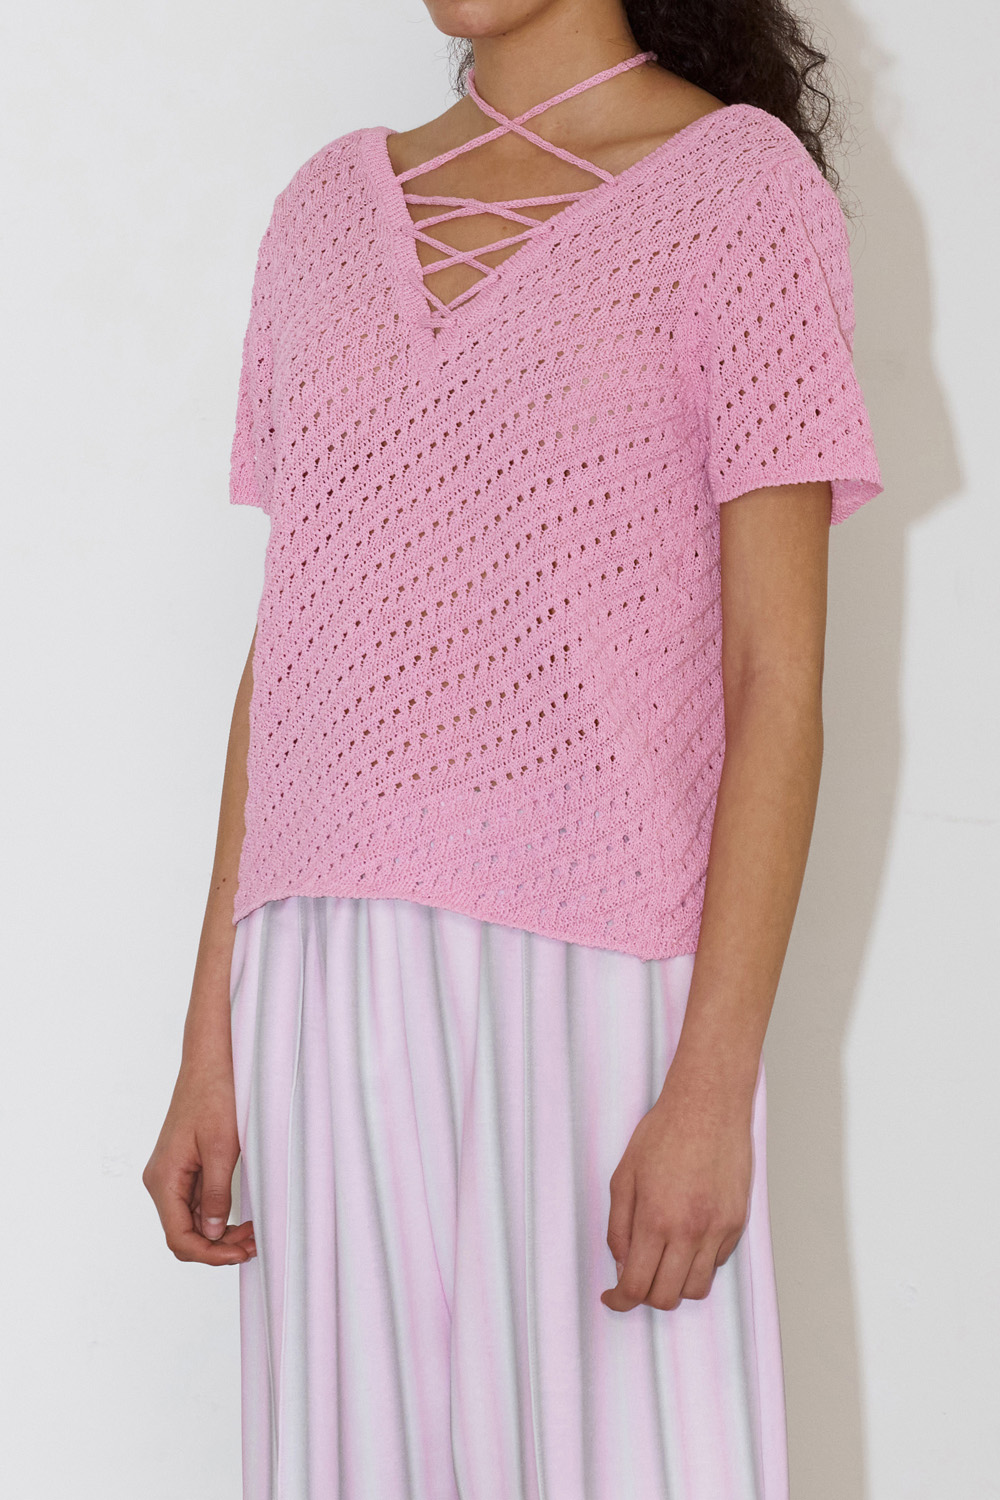 Womanly Crochet Top_Pink